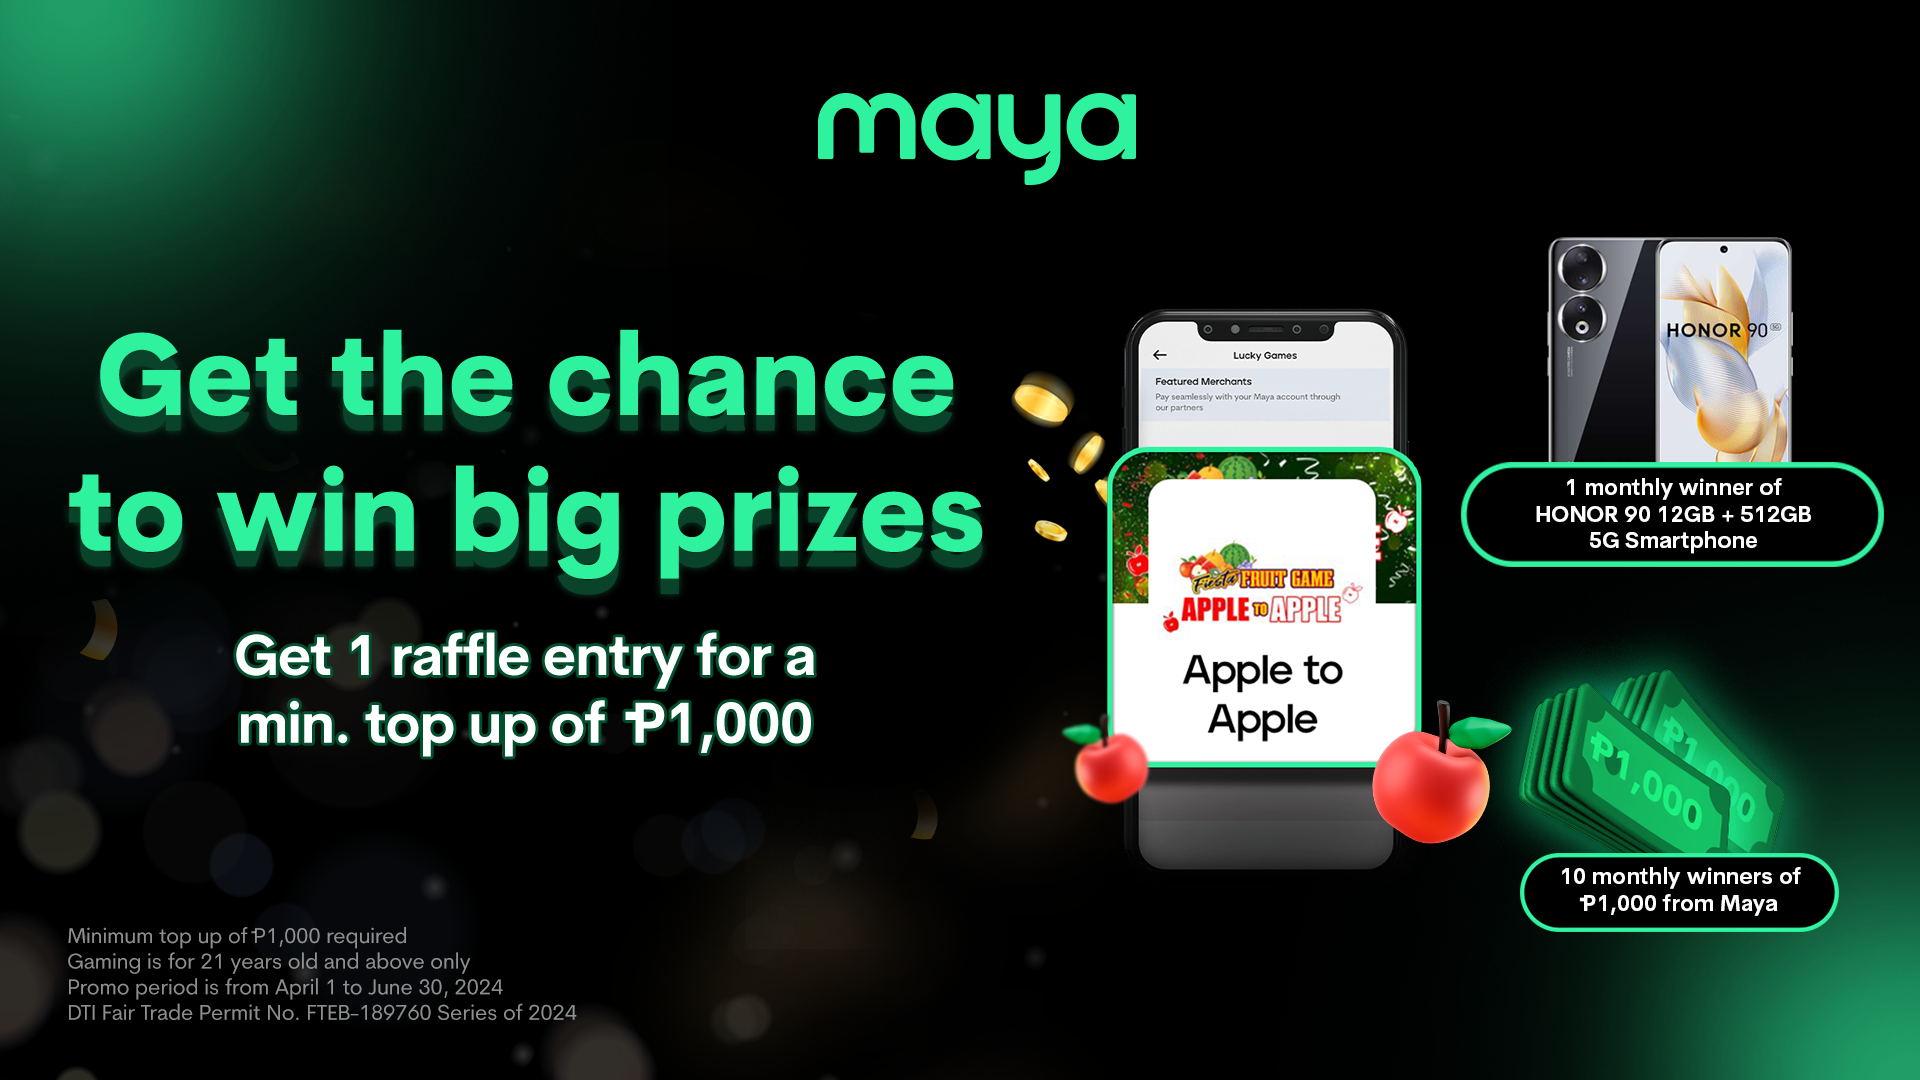 Top up your Apple to Apple wallet with Maya for a minimum of P1,000 and get one raffle entry!